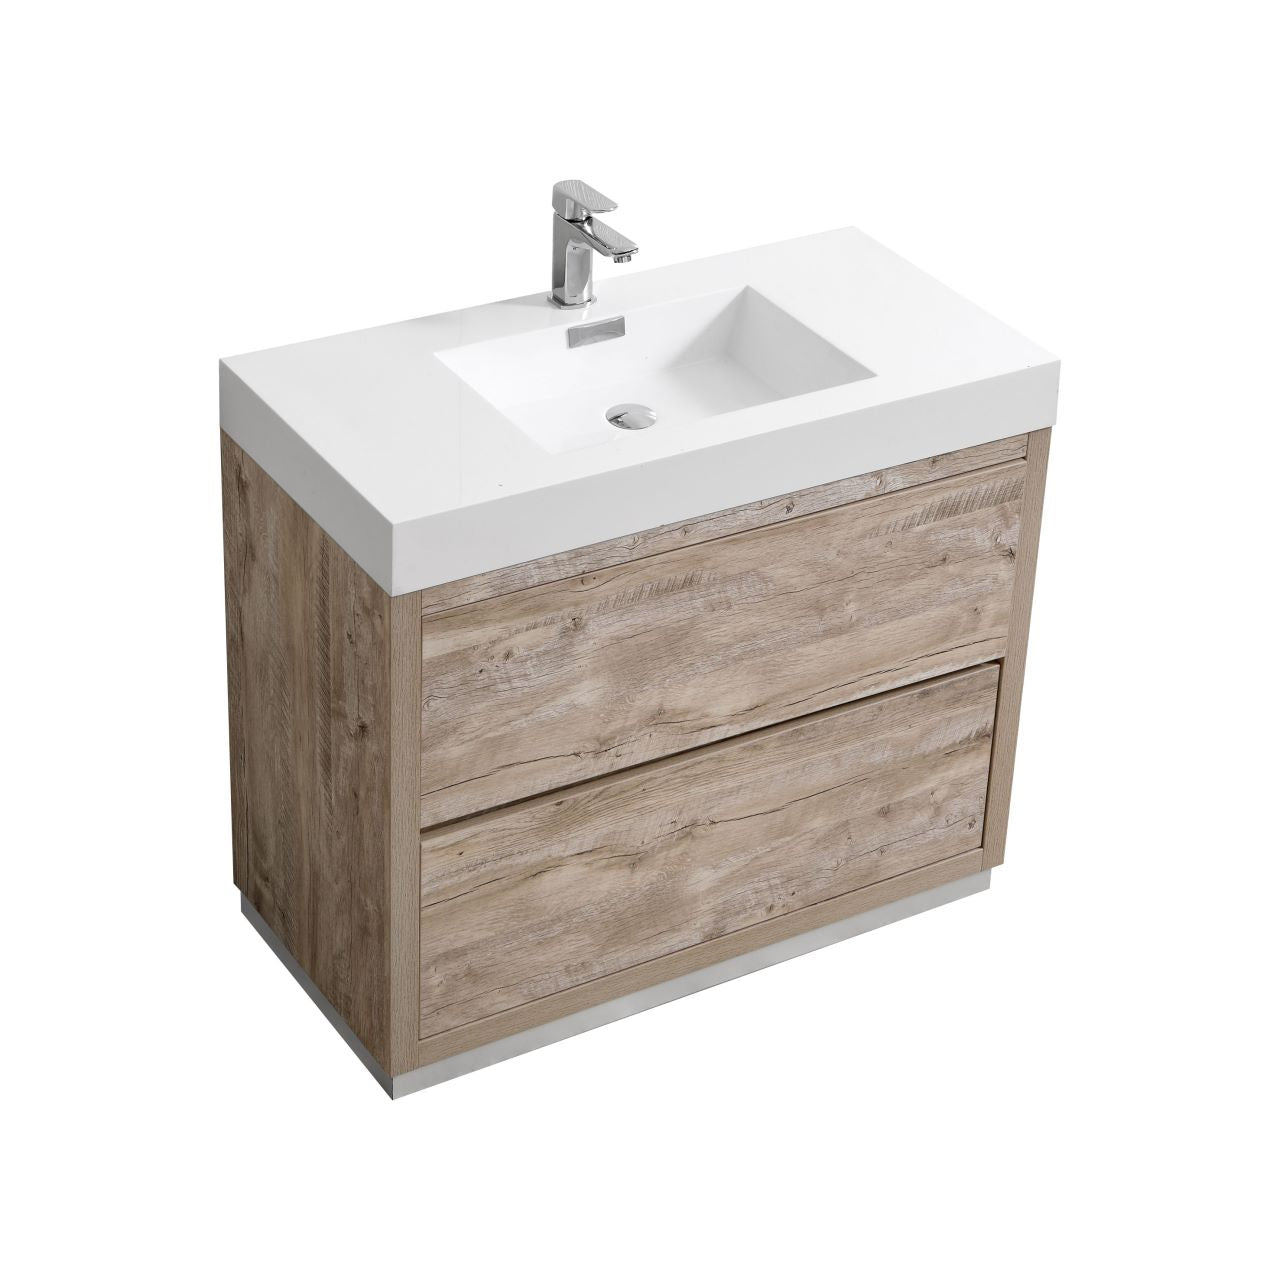 KUBEBATH Bliss FMB40-NW 40" Single Bathroom Vanity in Nature Wood with White Acrylic Composite, Integrated Sink, Angled View